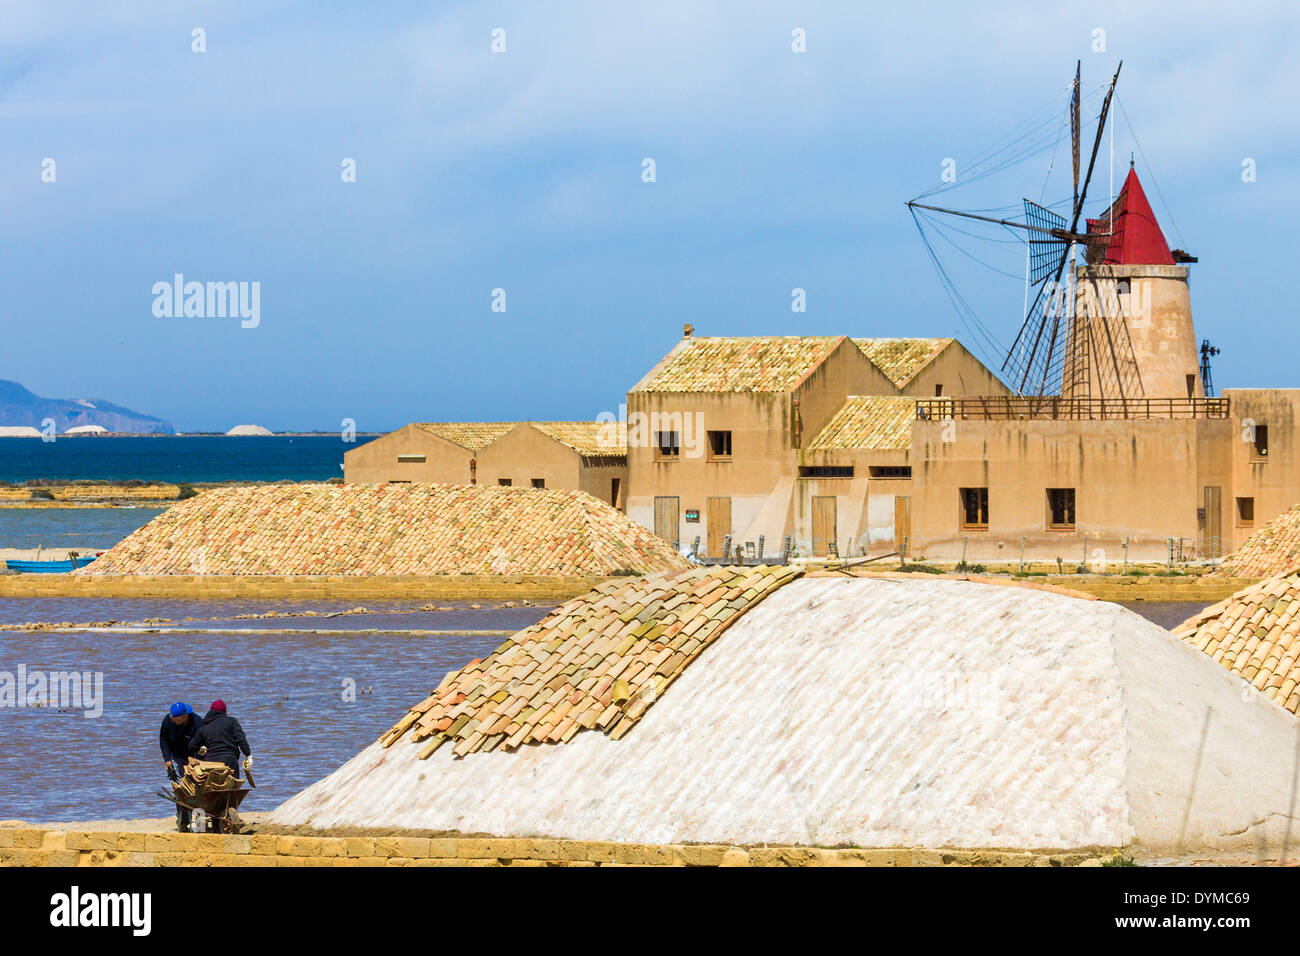 16thC windmill at the Ettore & Infersa Saltworks in the Stagnone Lagoon salt pan area south of Trapani; Marsala, Sicily, Italy Stock Photo